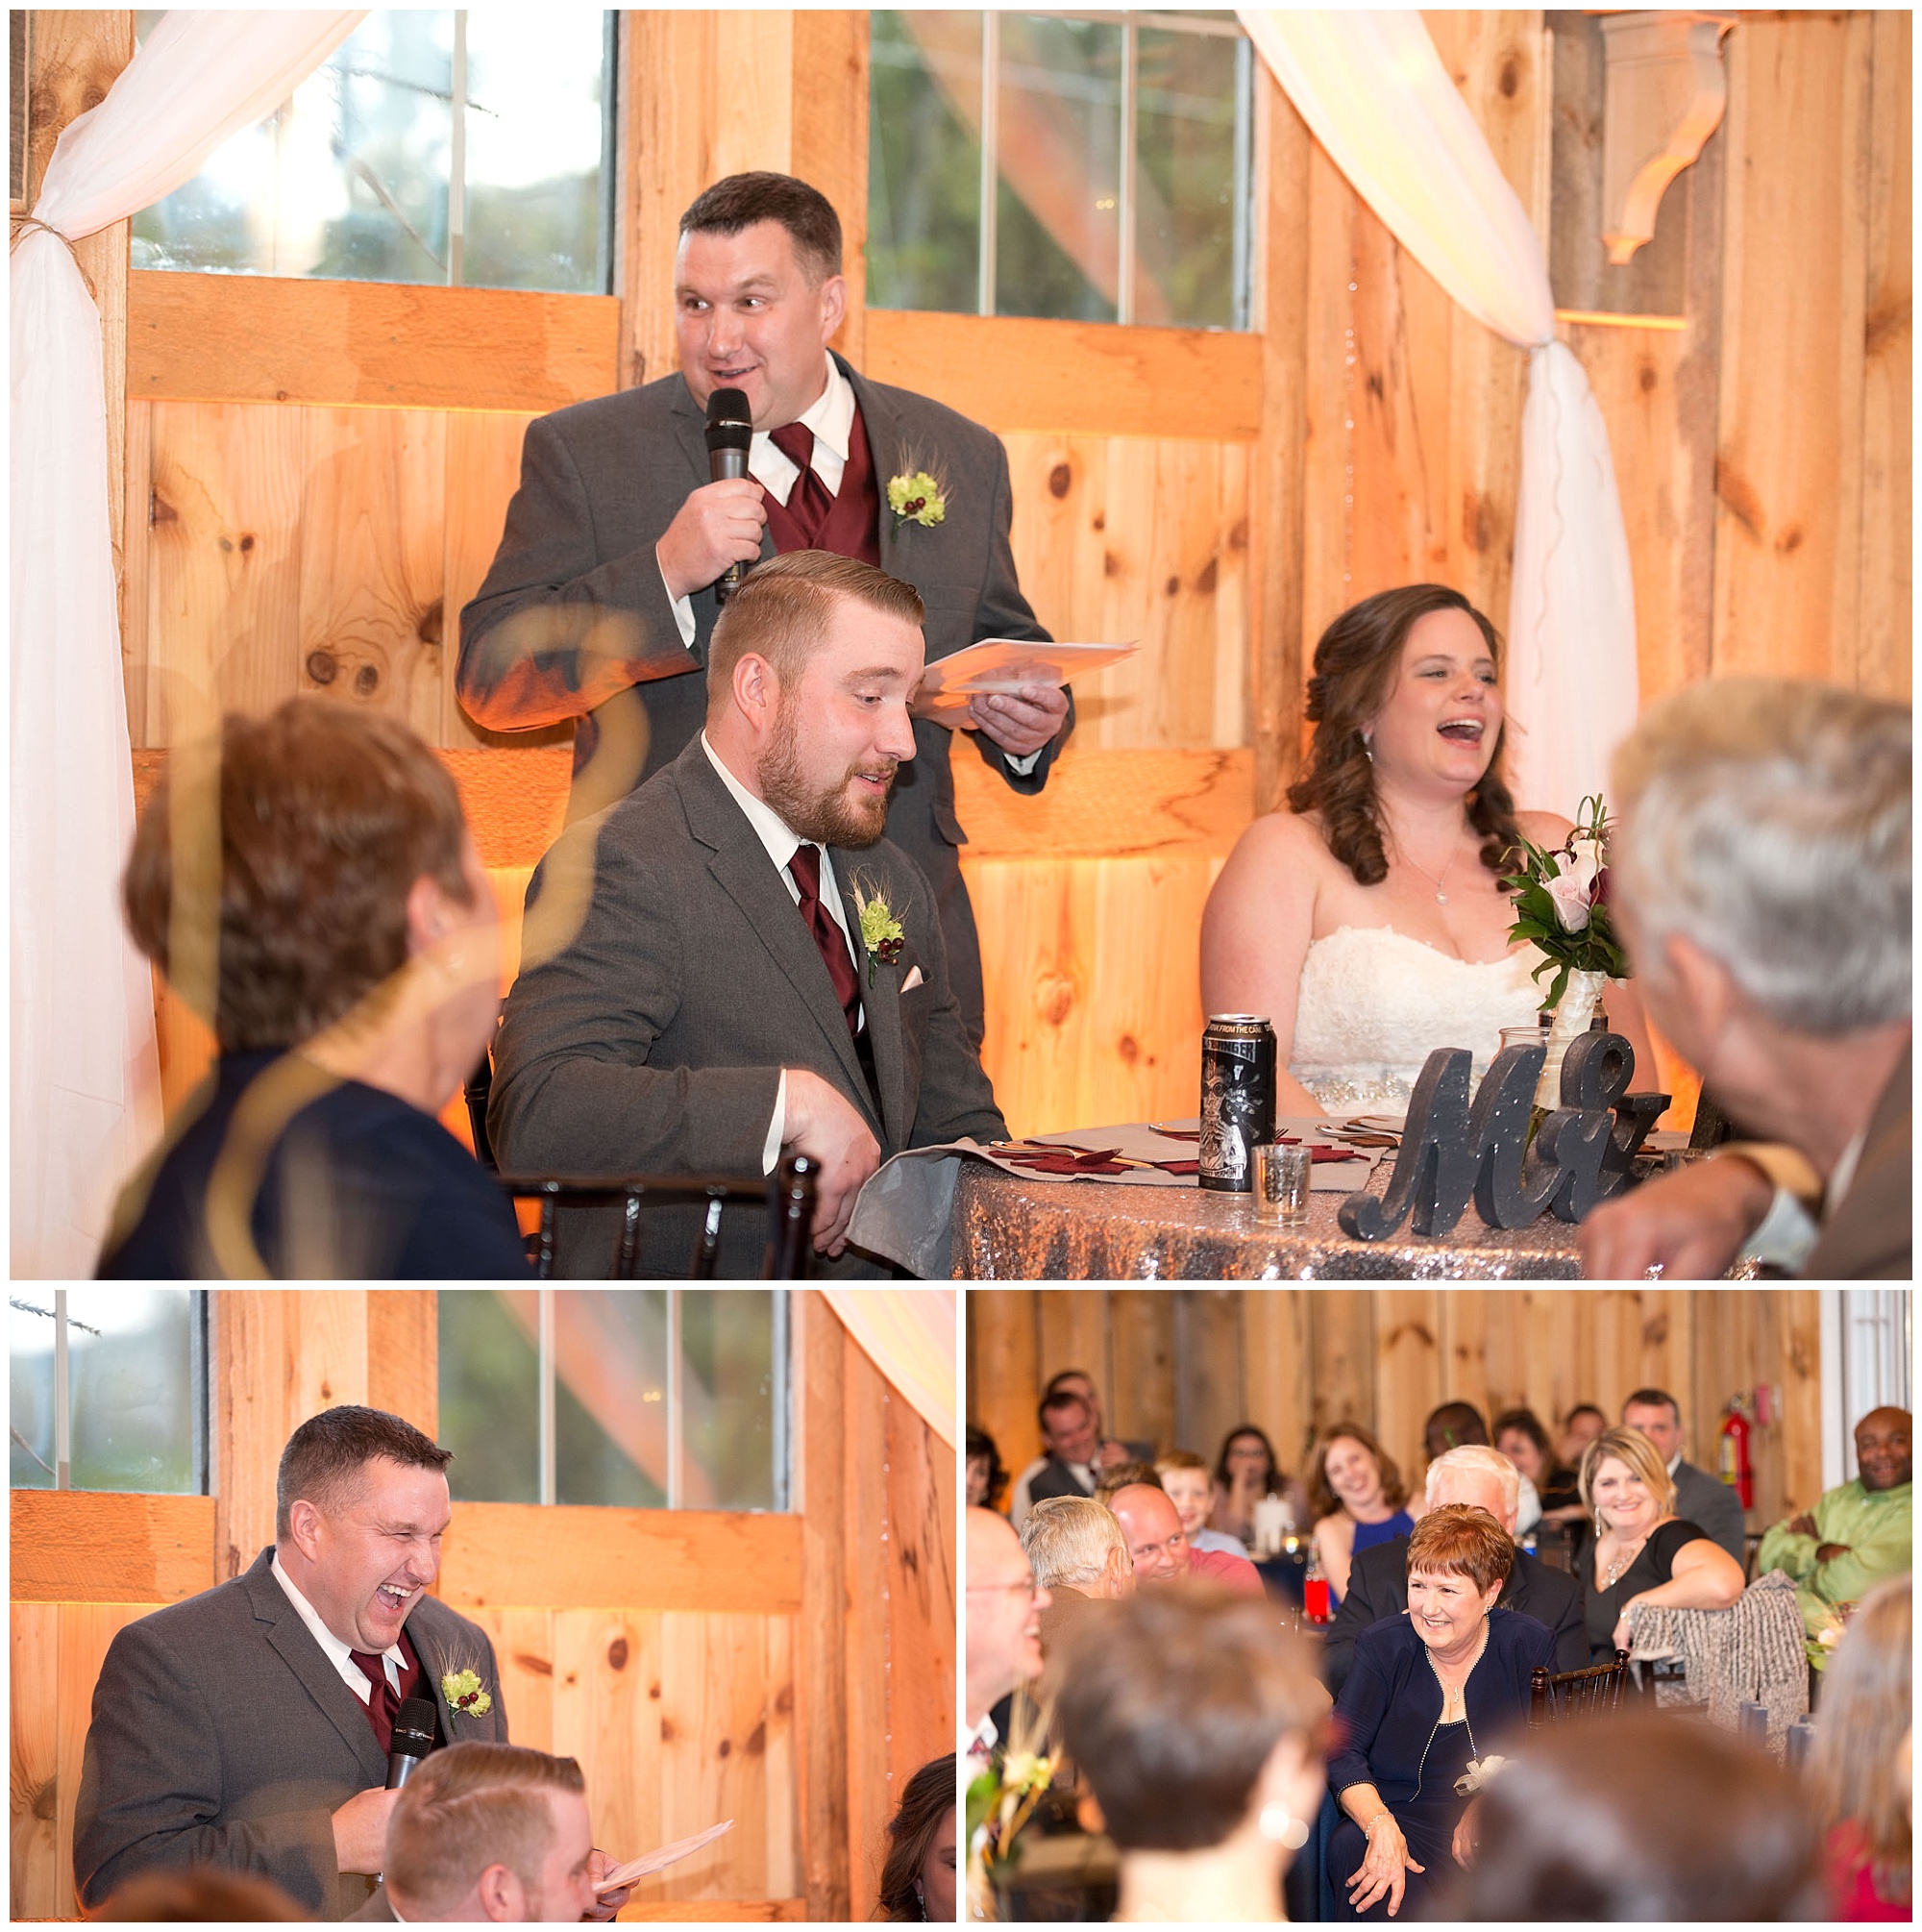 Photos of the best man giving his speech and toast.